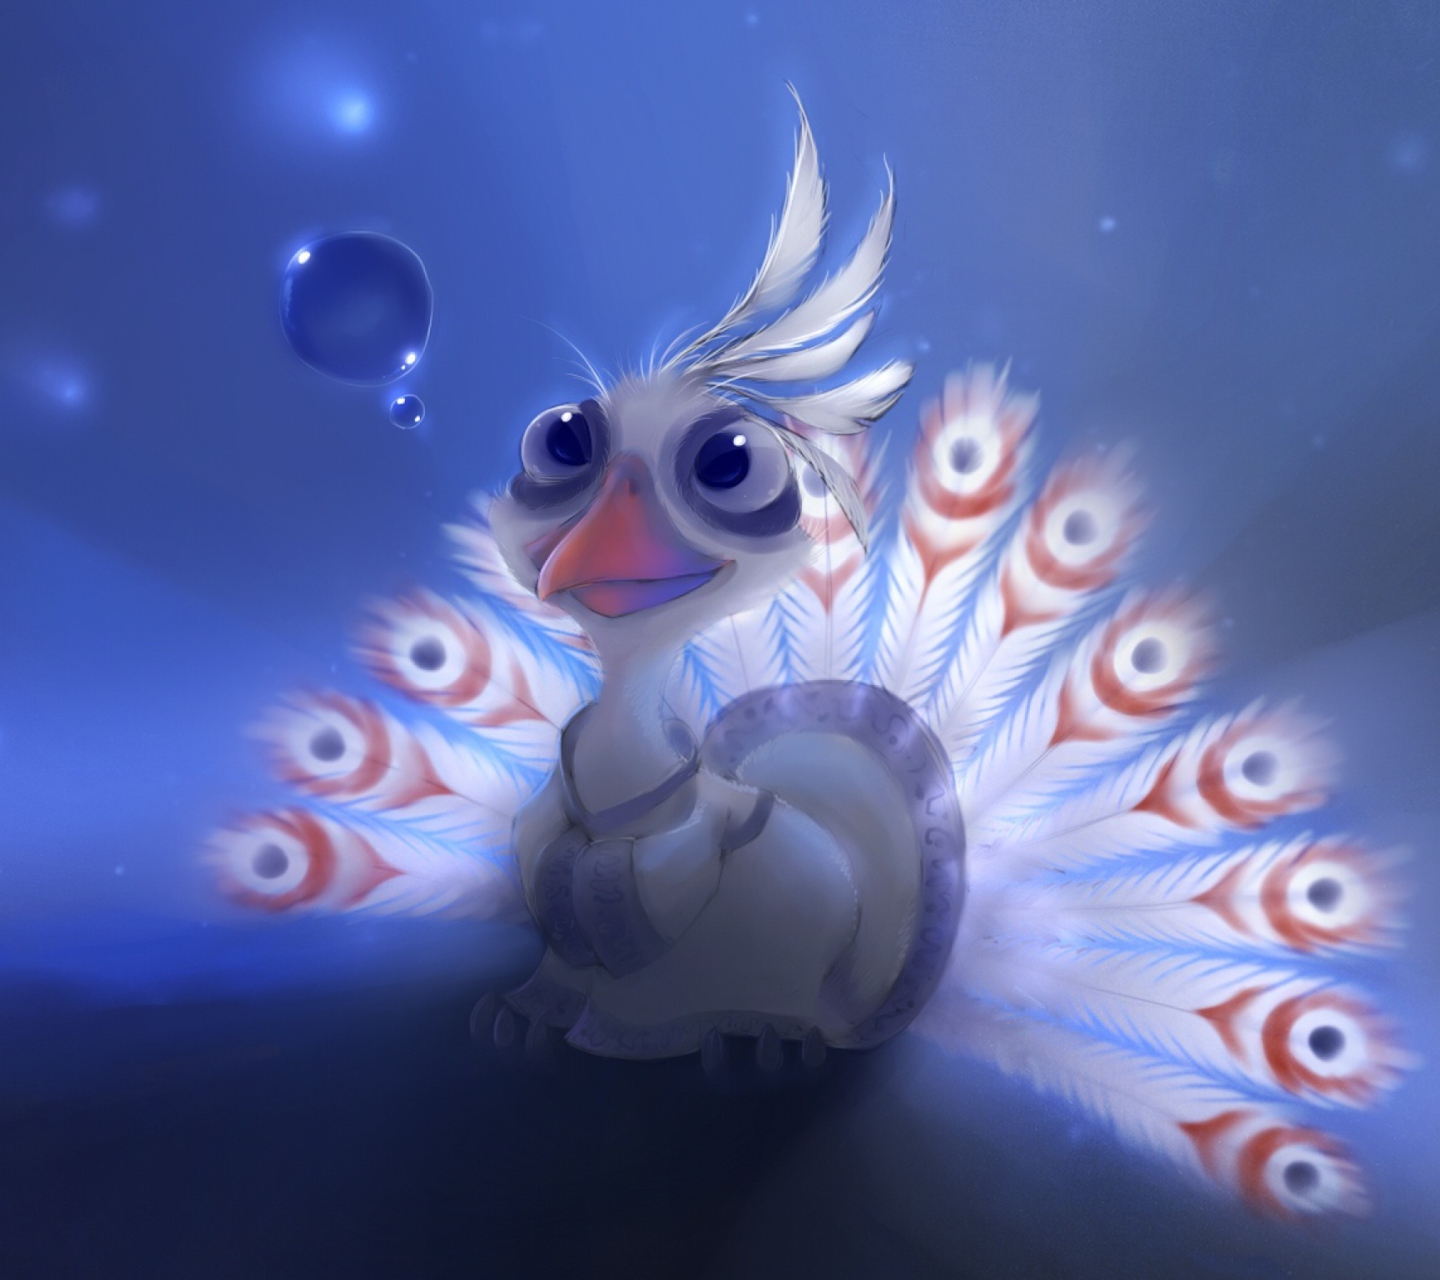 White Peacock Painting wallpaper 1440x1280